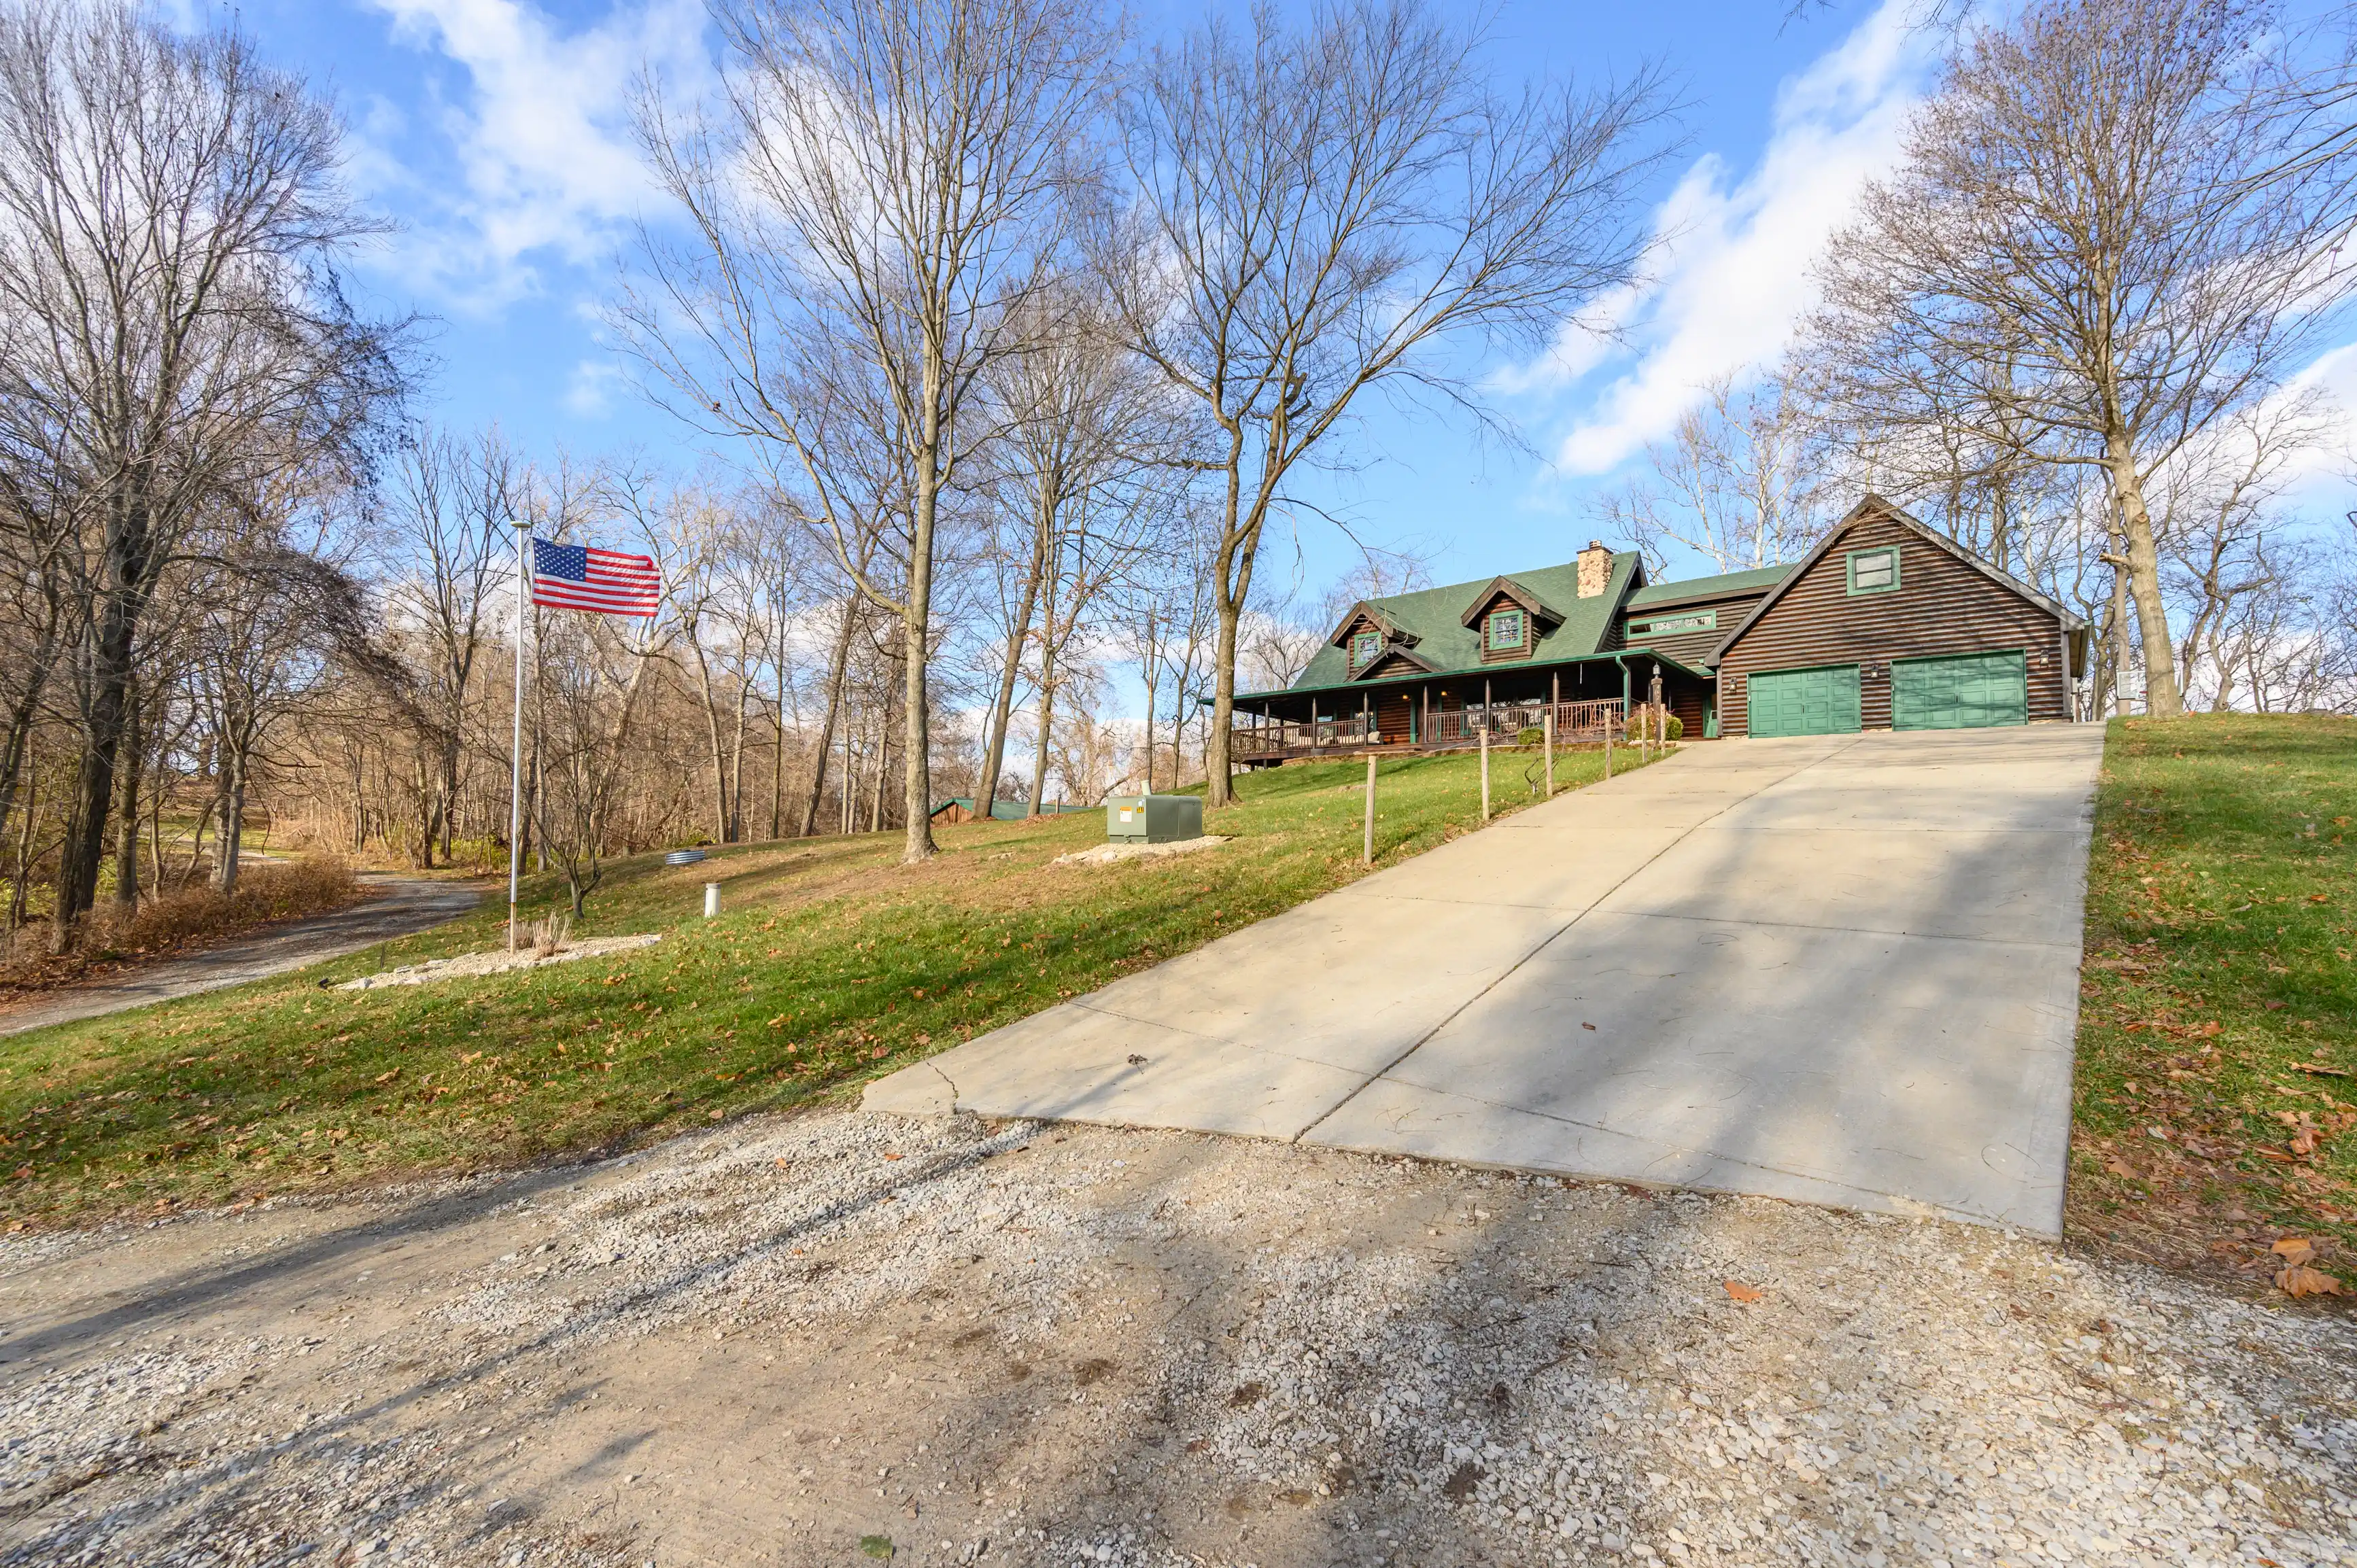 A rustic log cabin with a green roof and attached garage located in a leafless wooded area with an American flag on a flagpole, under a blue sky with scattered clouds.